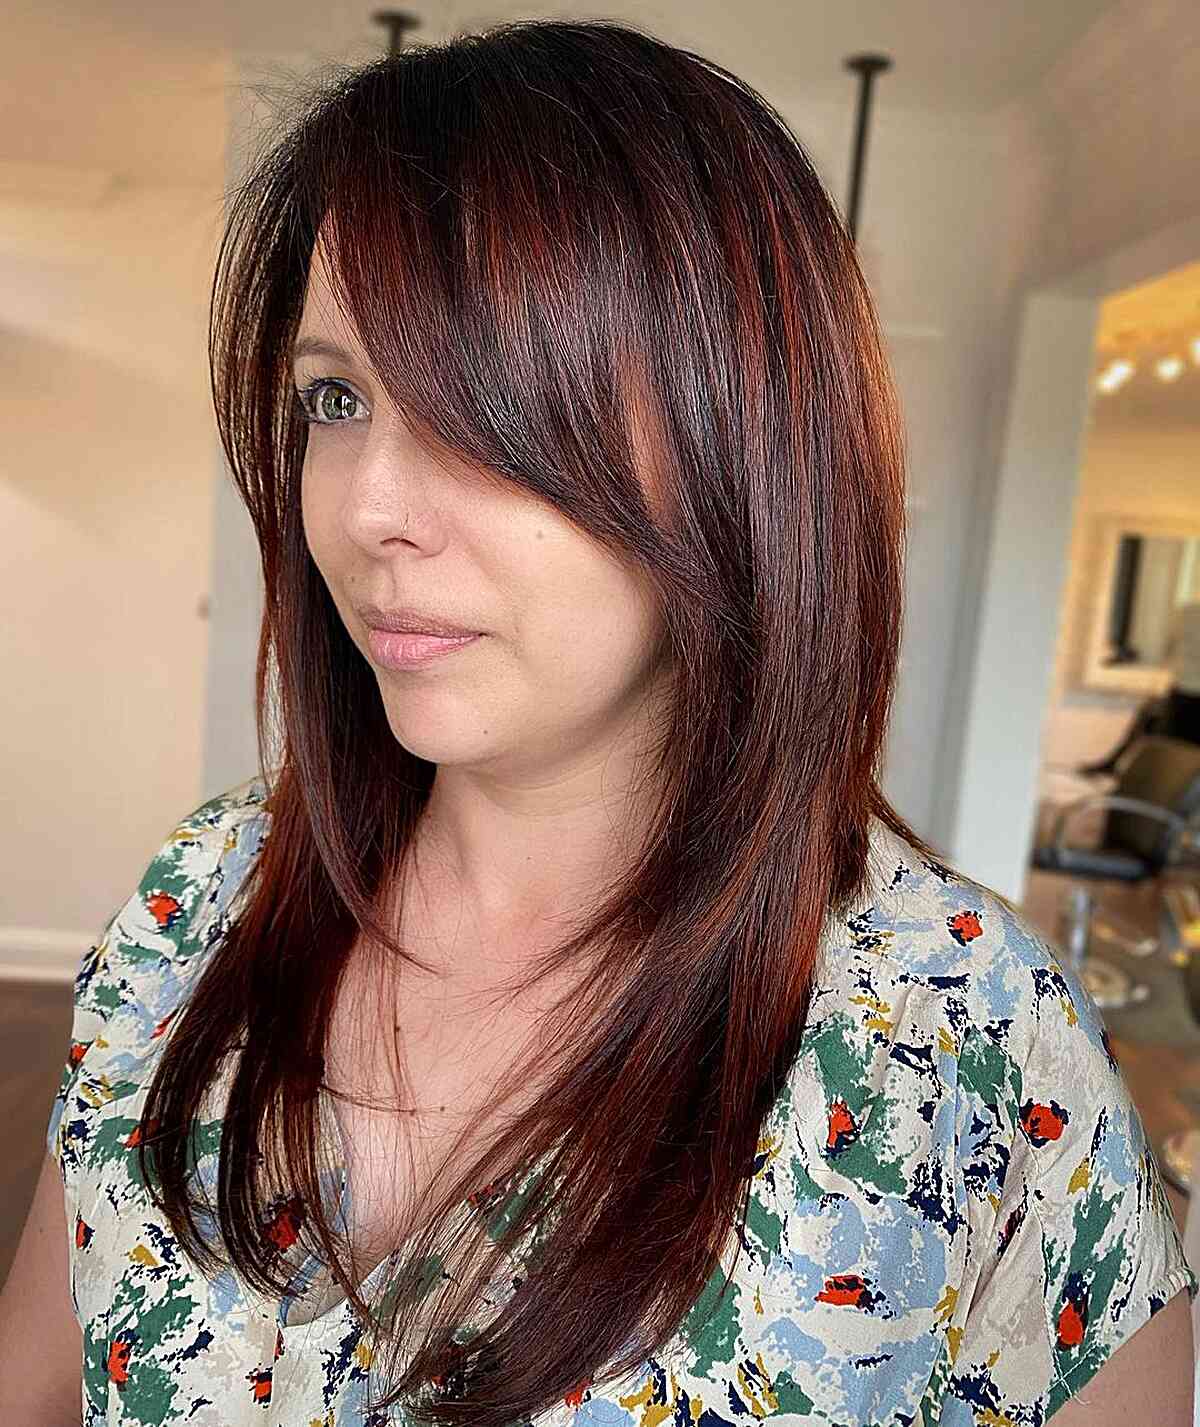 Vibrant Long Red Hair with Long Side Bangs